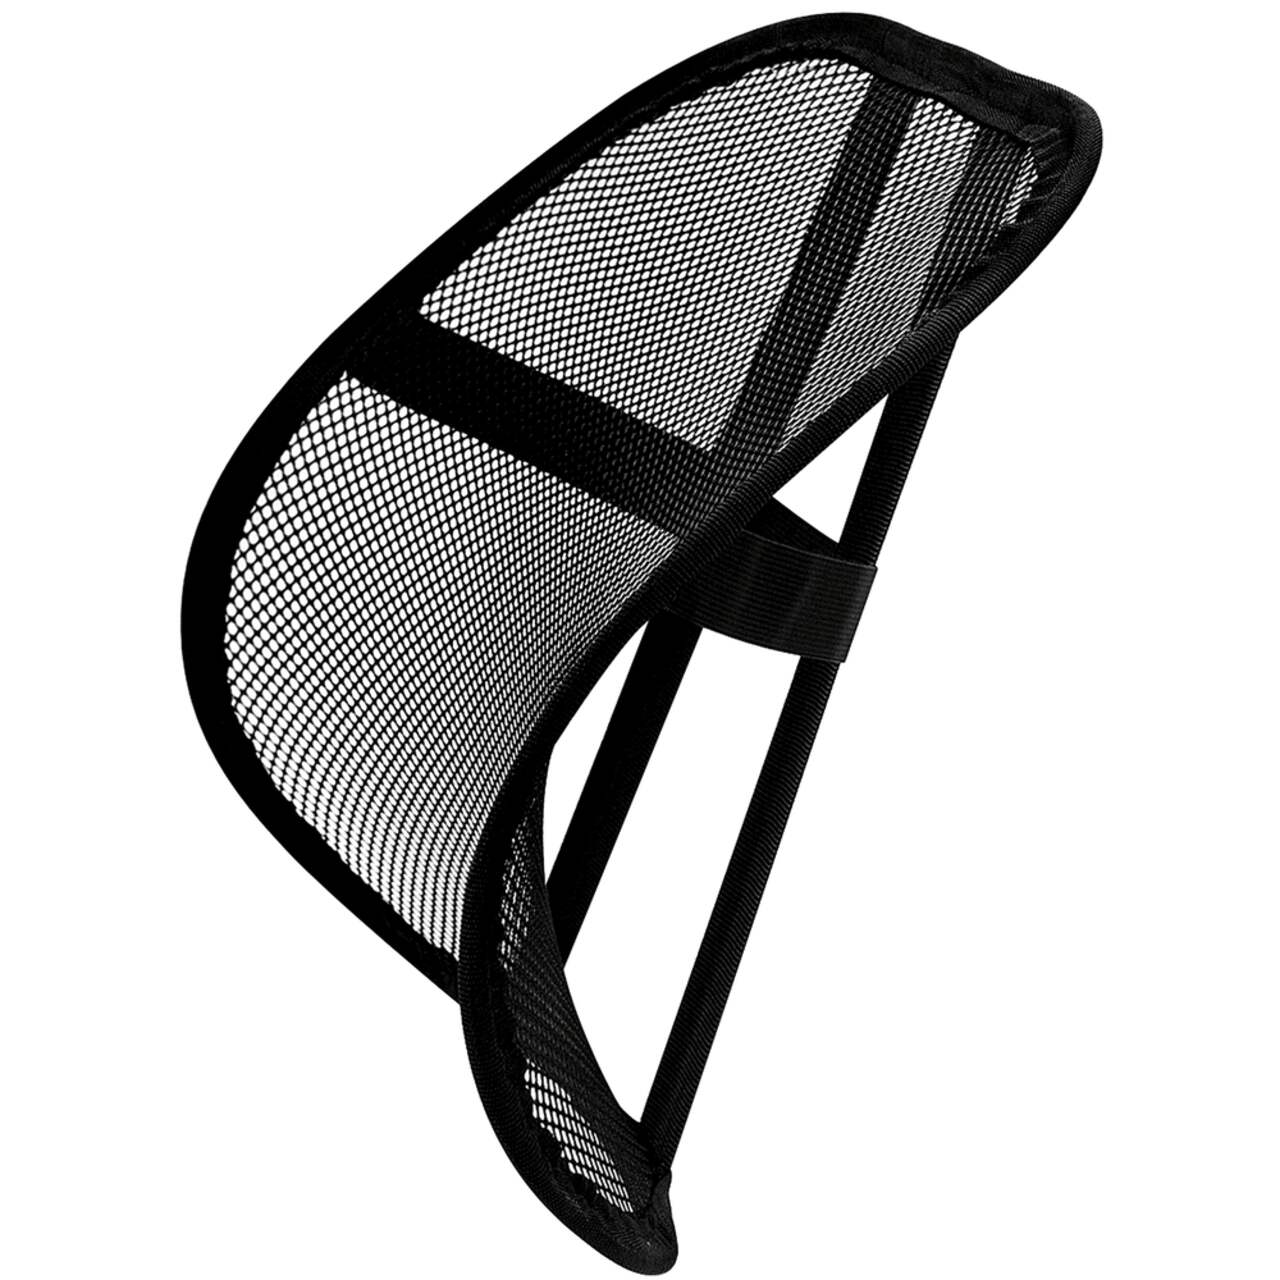 https://media-www.canadiantire.ca/product/living/electronics/home-communications/0749803/fellowes-office-suites-mesh-back-support-023963f8-7929-4faa-ab31-9ceca1b967be.png?imdensity=1&imwidth=640&impolicy=mZoom